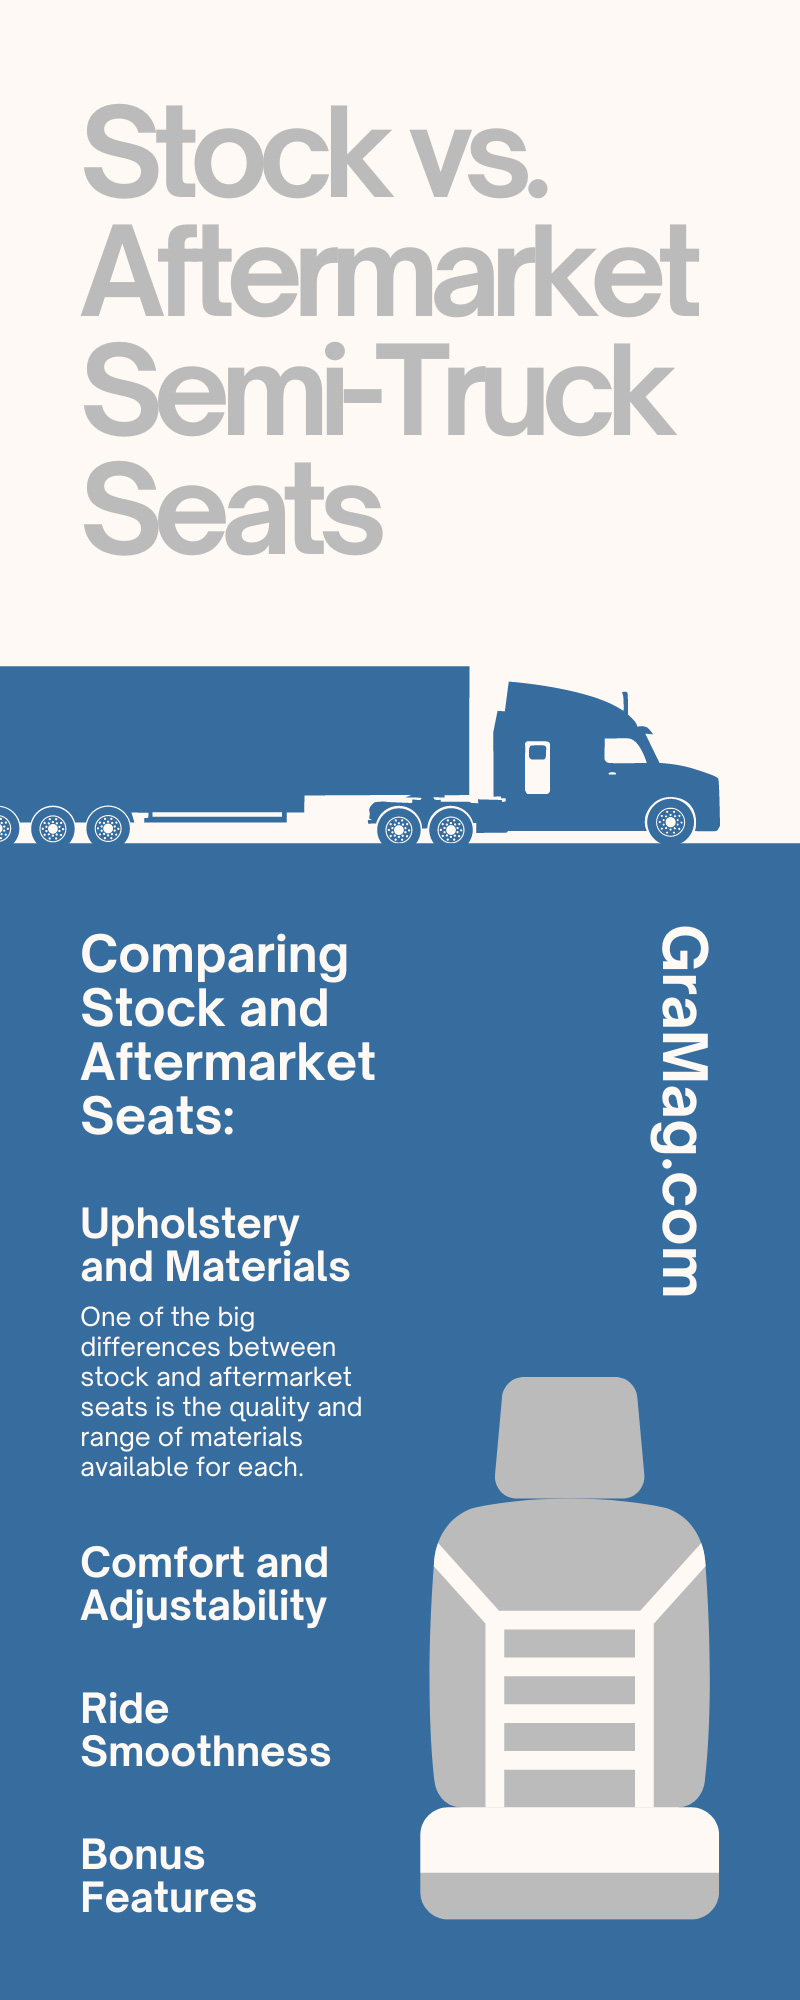 Stock vs. Aftermarket Semi-Truck Seats: Which Is Better?